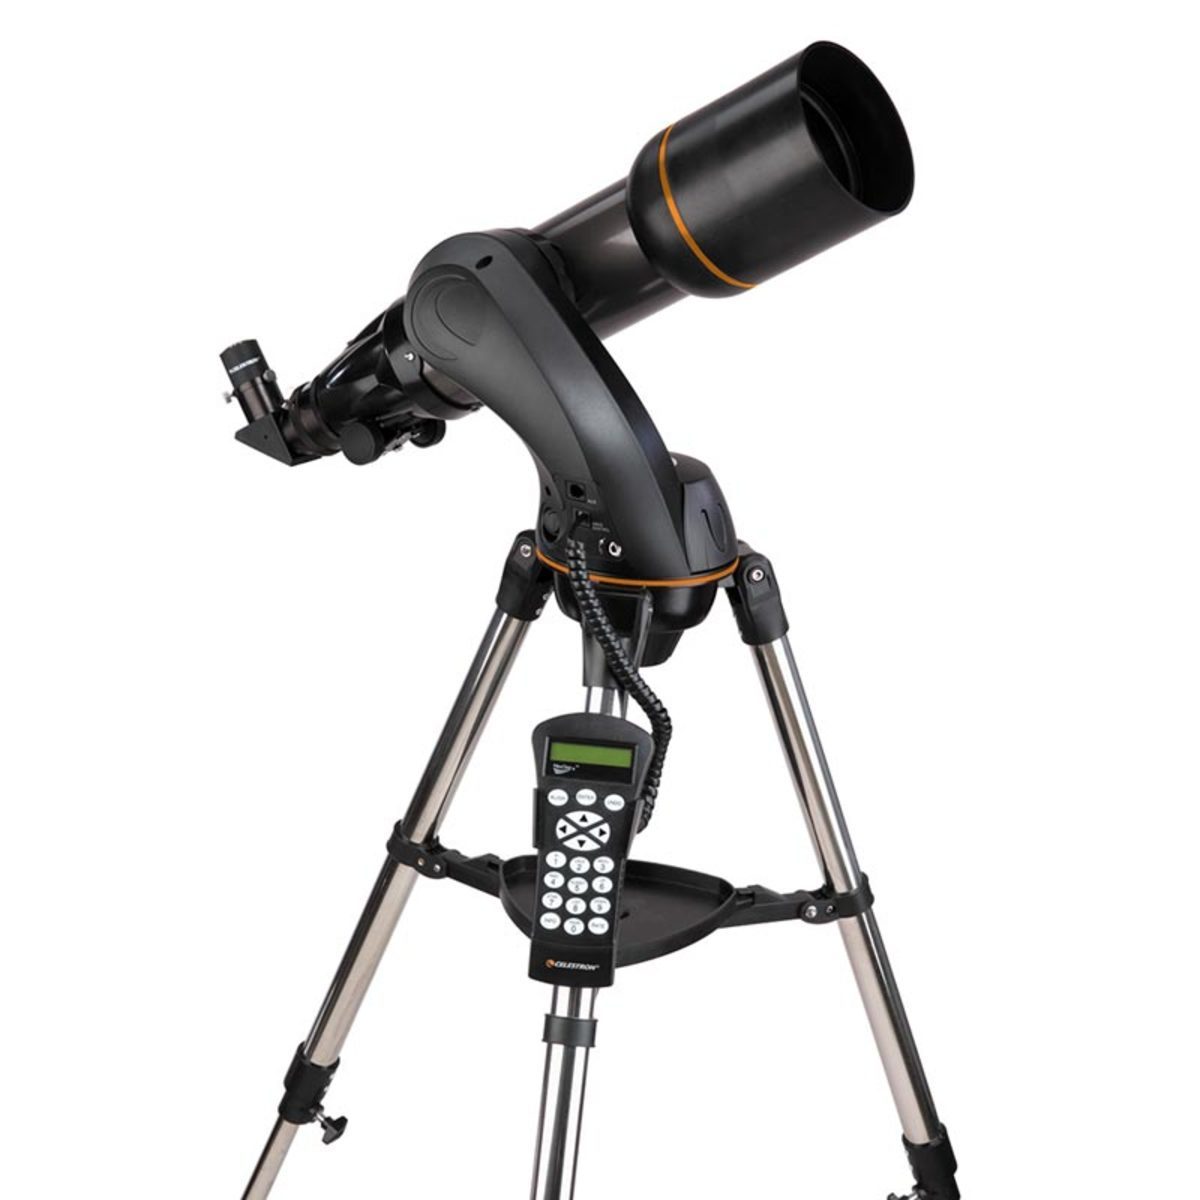 Celestron NexStar 102 SLT Refractor Telescope with Fully Automated Hand Control